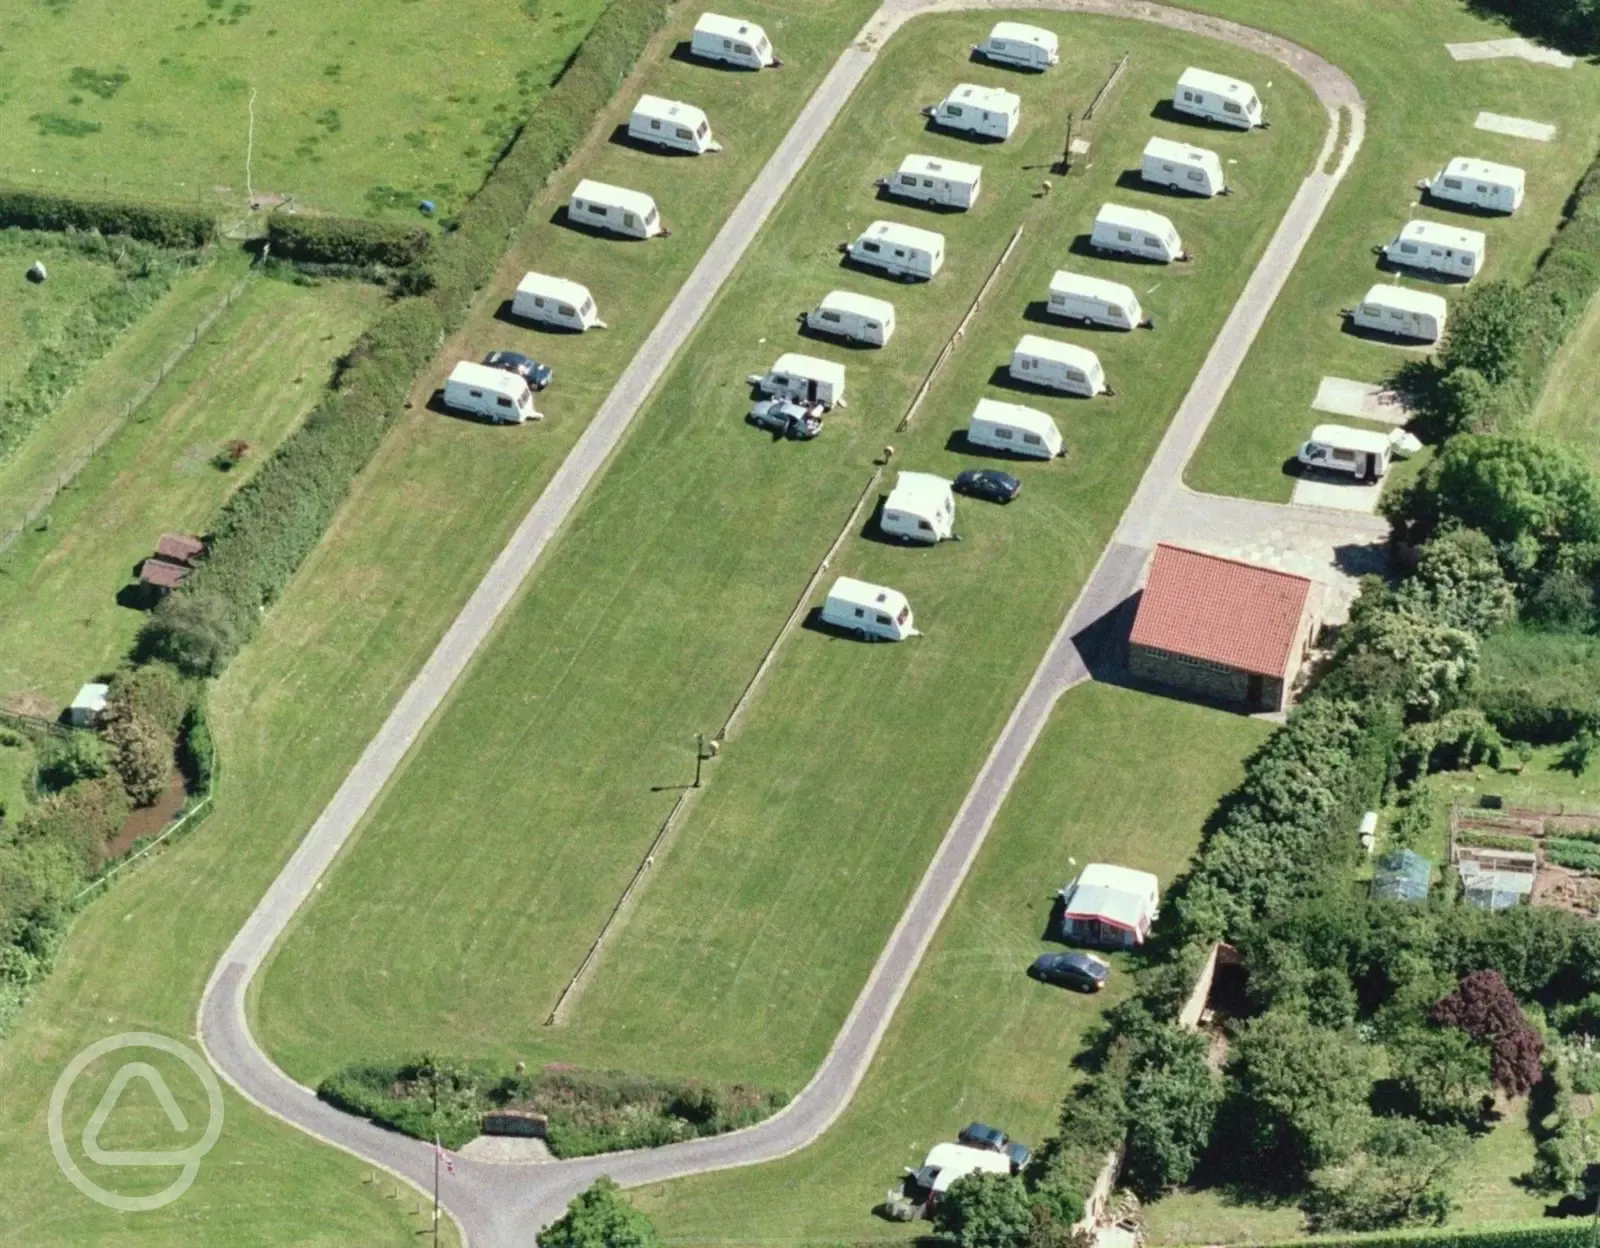 Aerial of the electric grass pitches